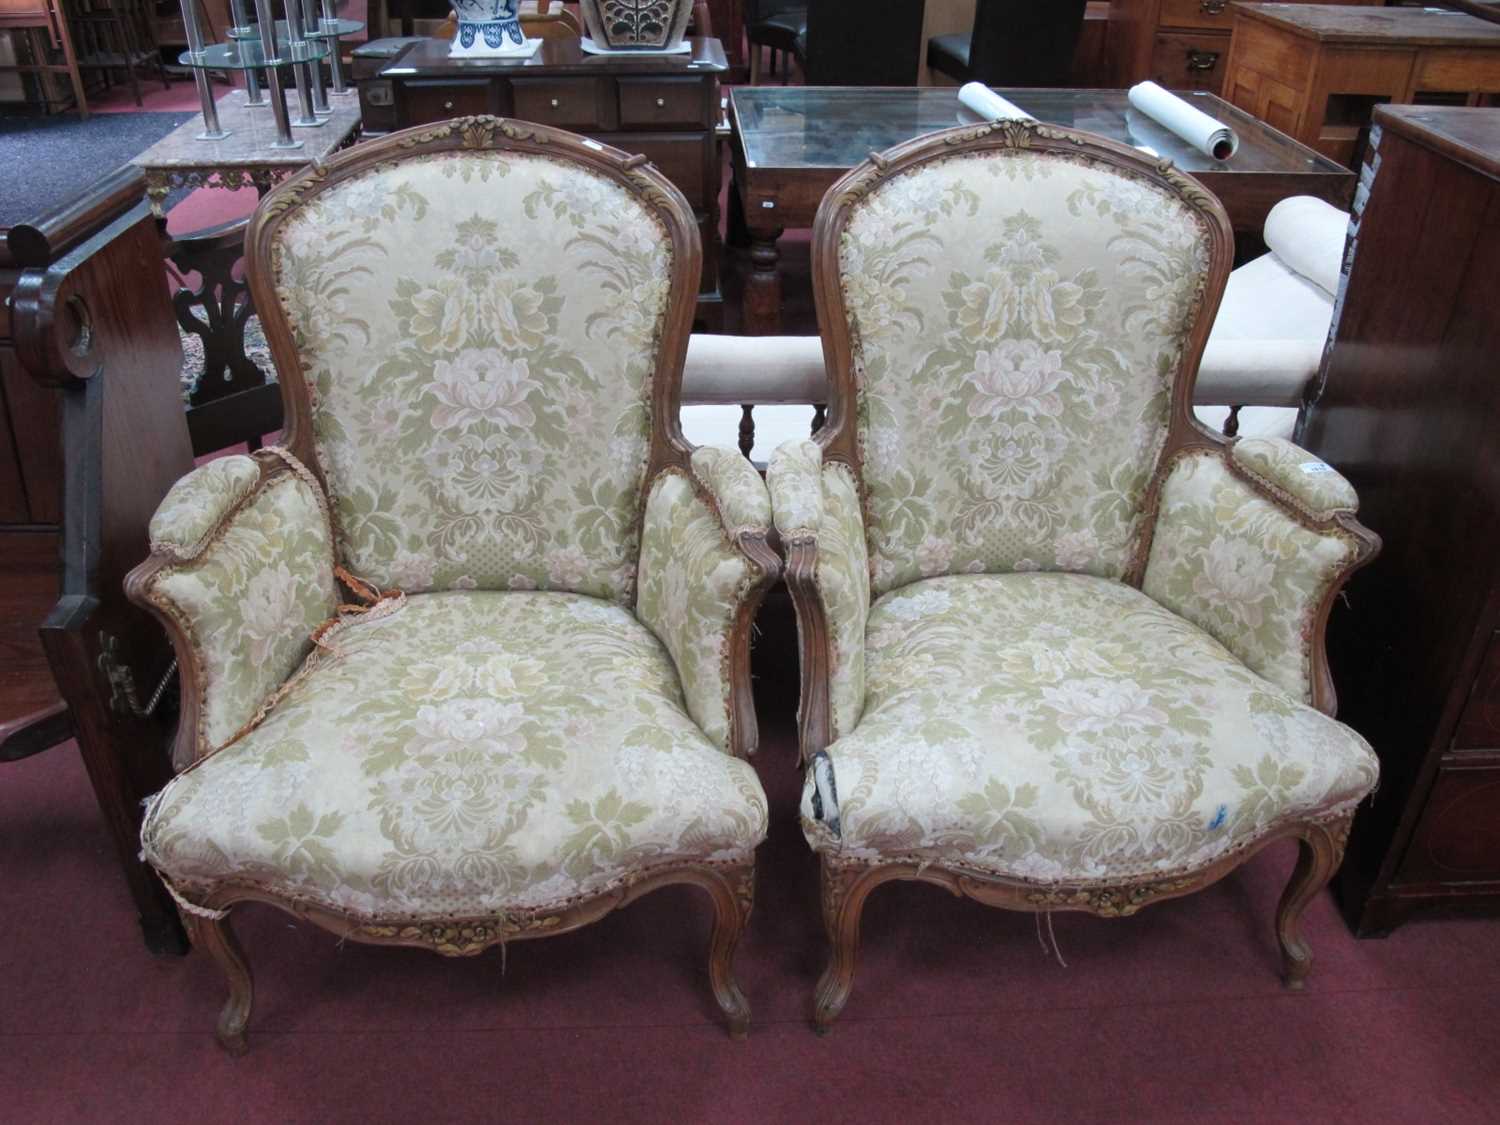 Pair of French Style Walnut Framed Easy Chairs, with scroll and floral carving, carbriole legs,